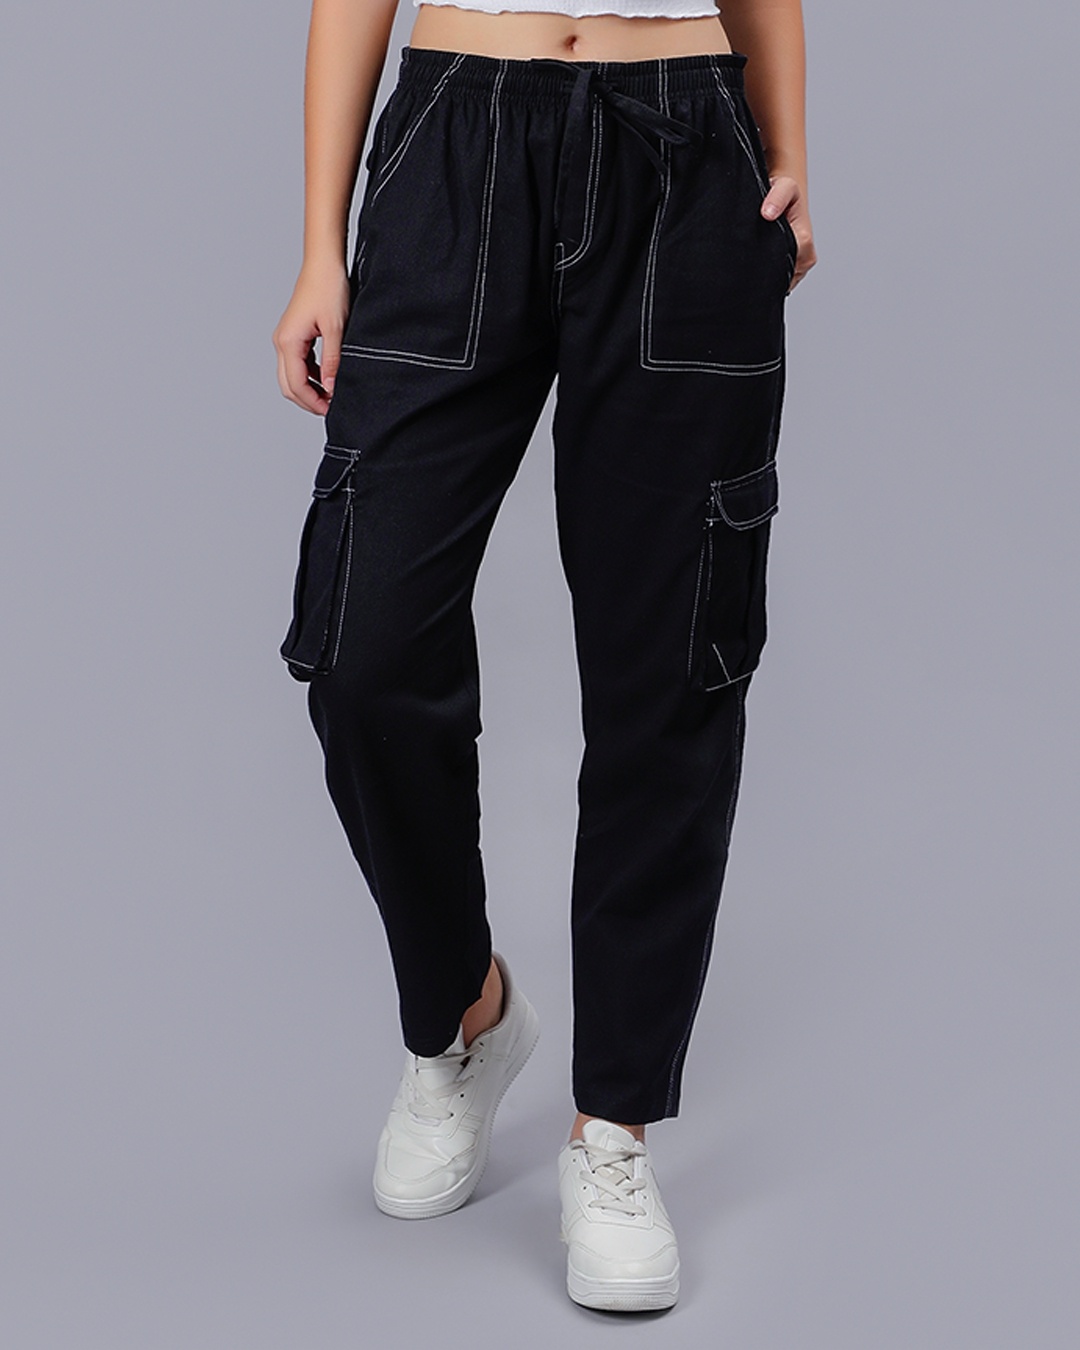 Loose Fit Cargo Pants for Women